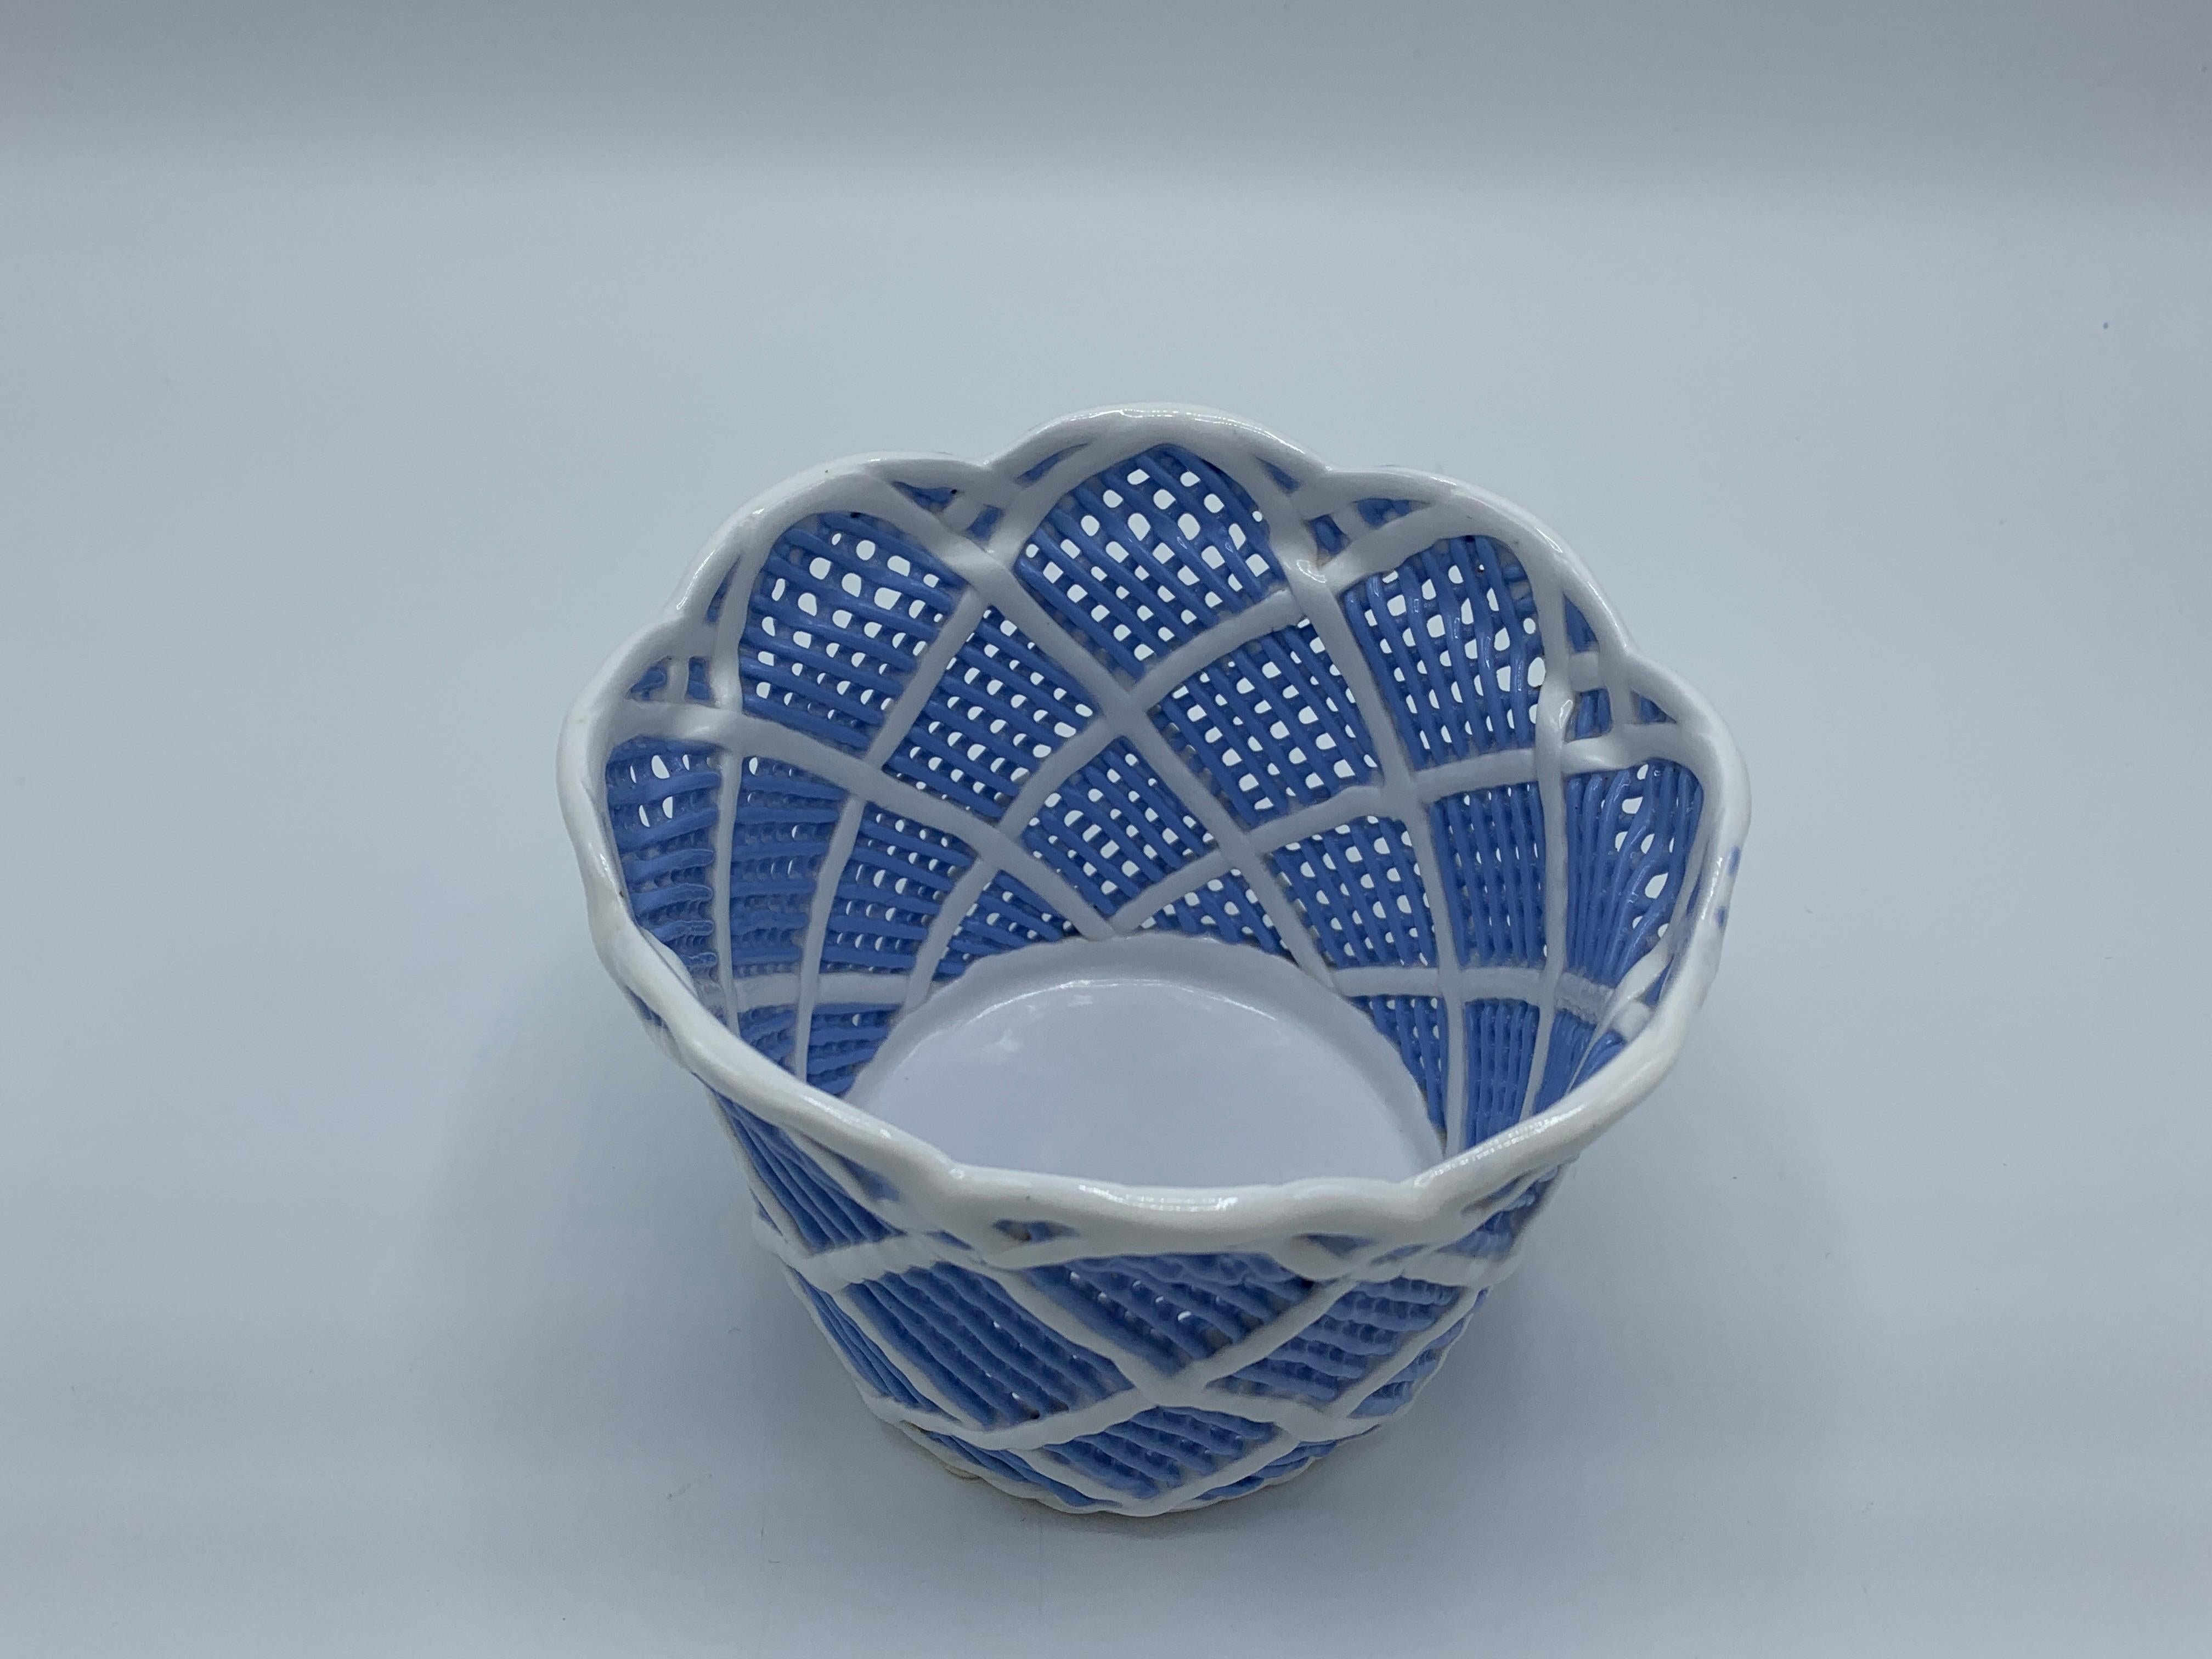 Chinoiserie 1960s Italian Blue and White Porcelain Basketweave Cachepot